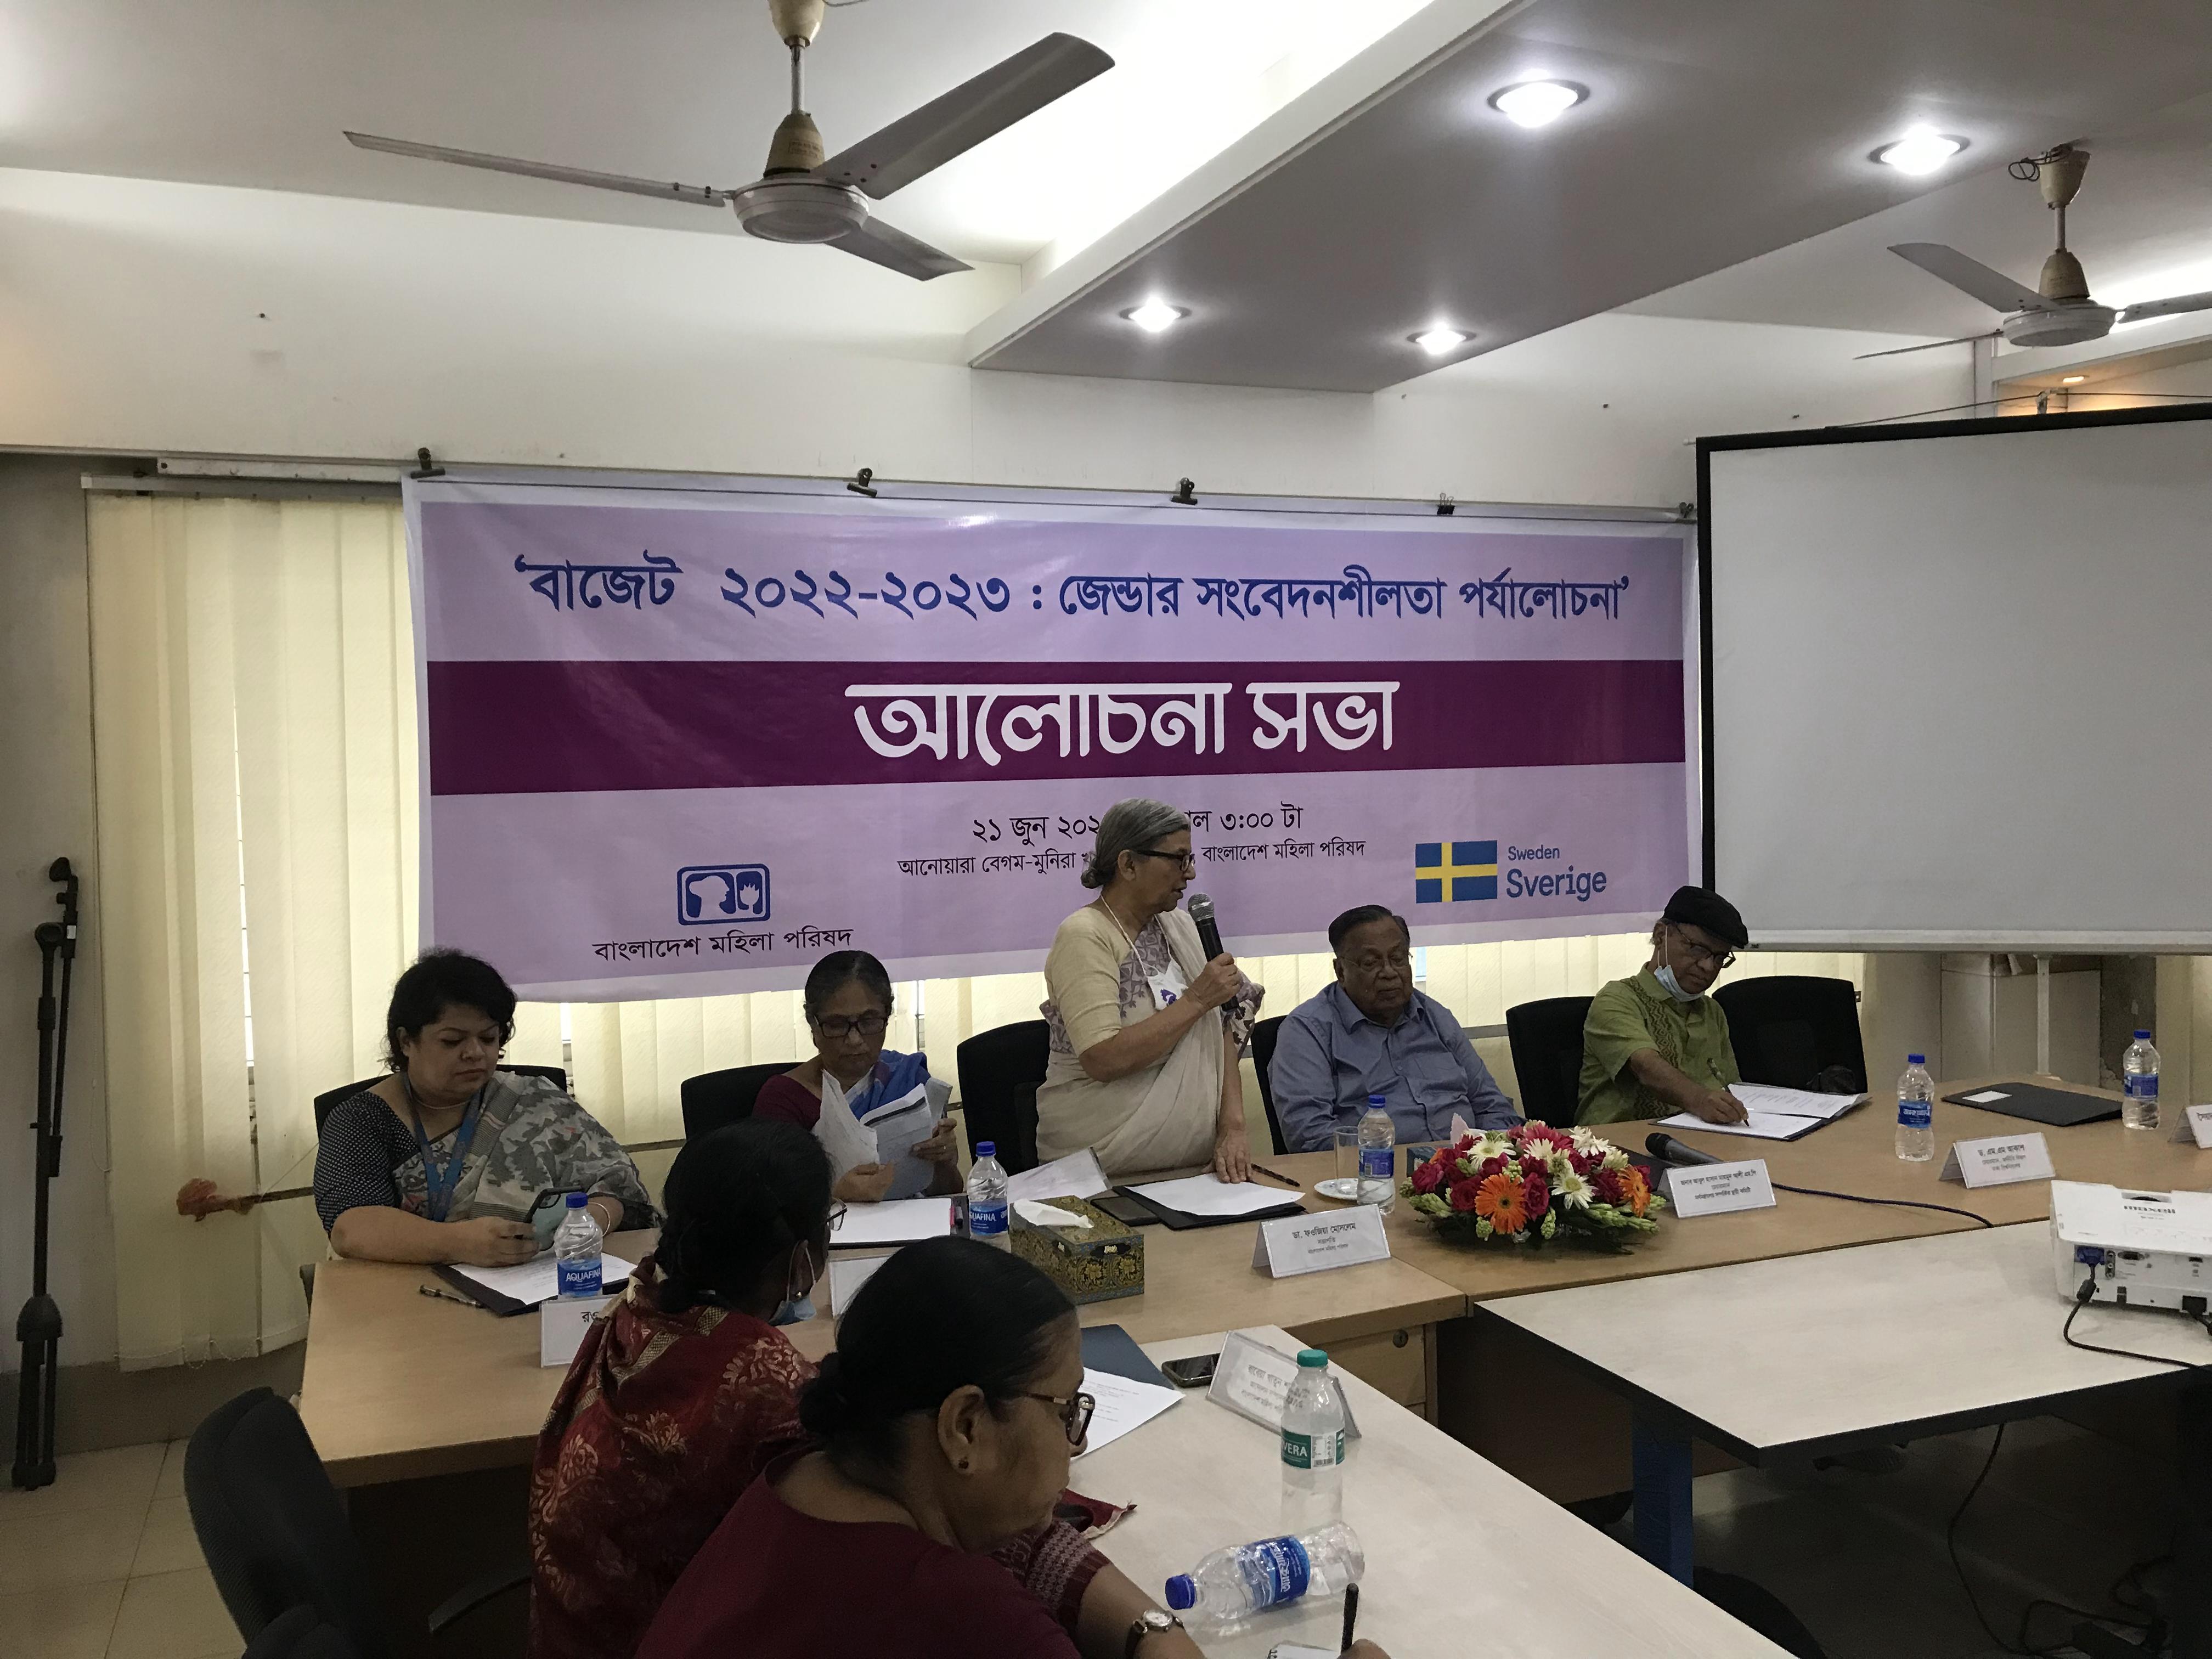 Discussion Meeting on “ Budget 2022-23: review on gender sensitivity